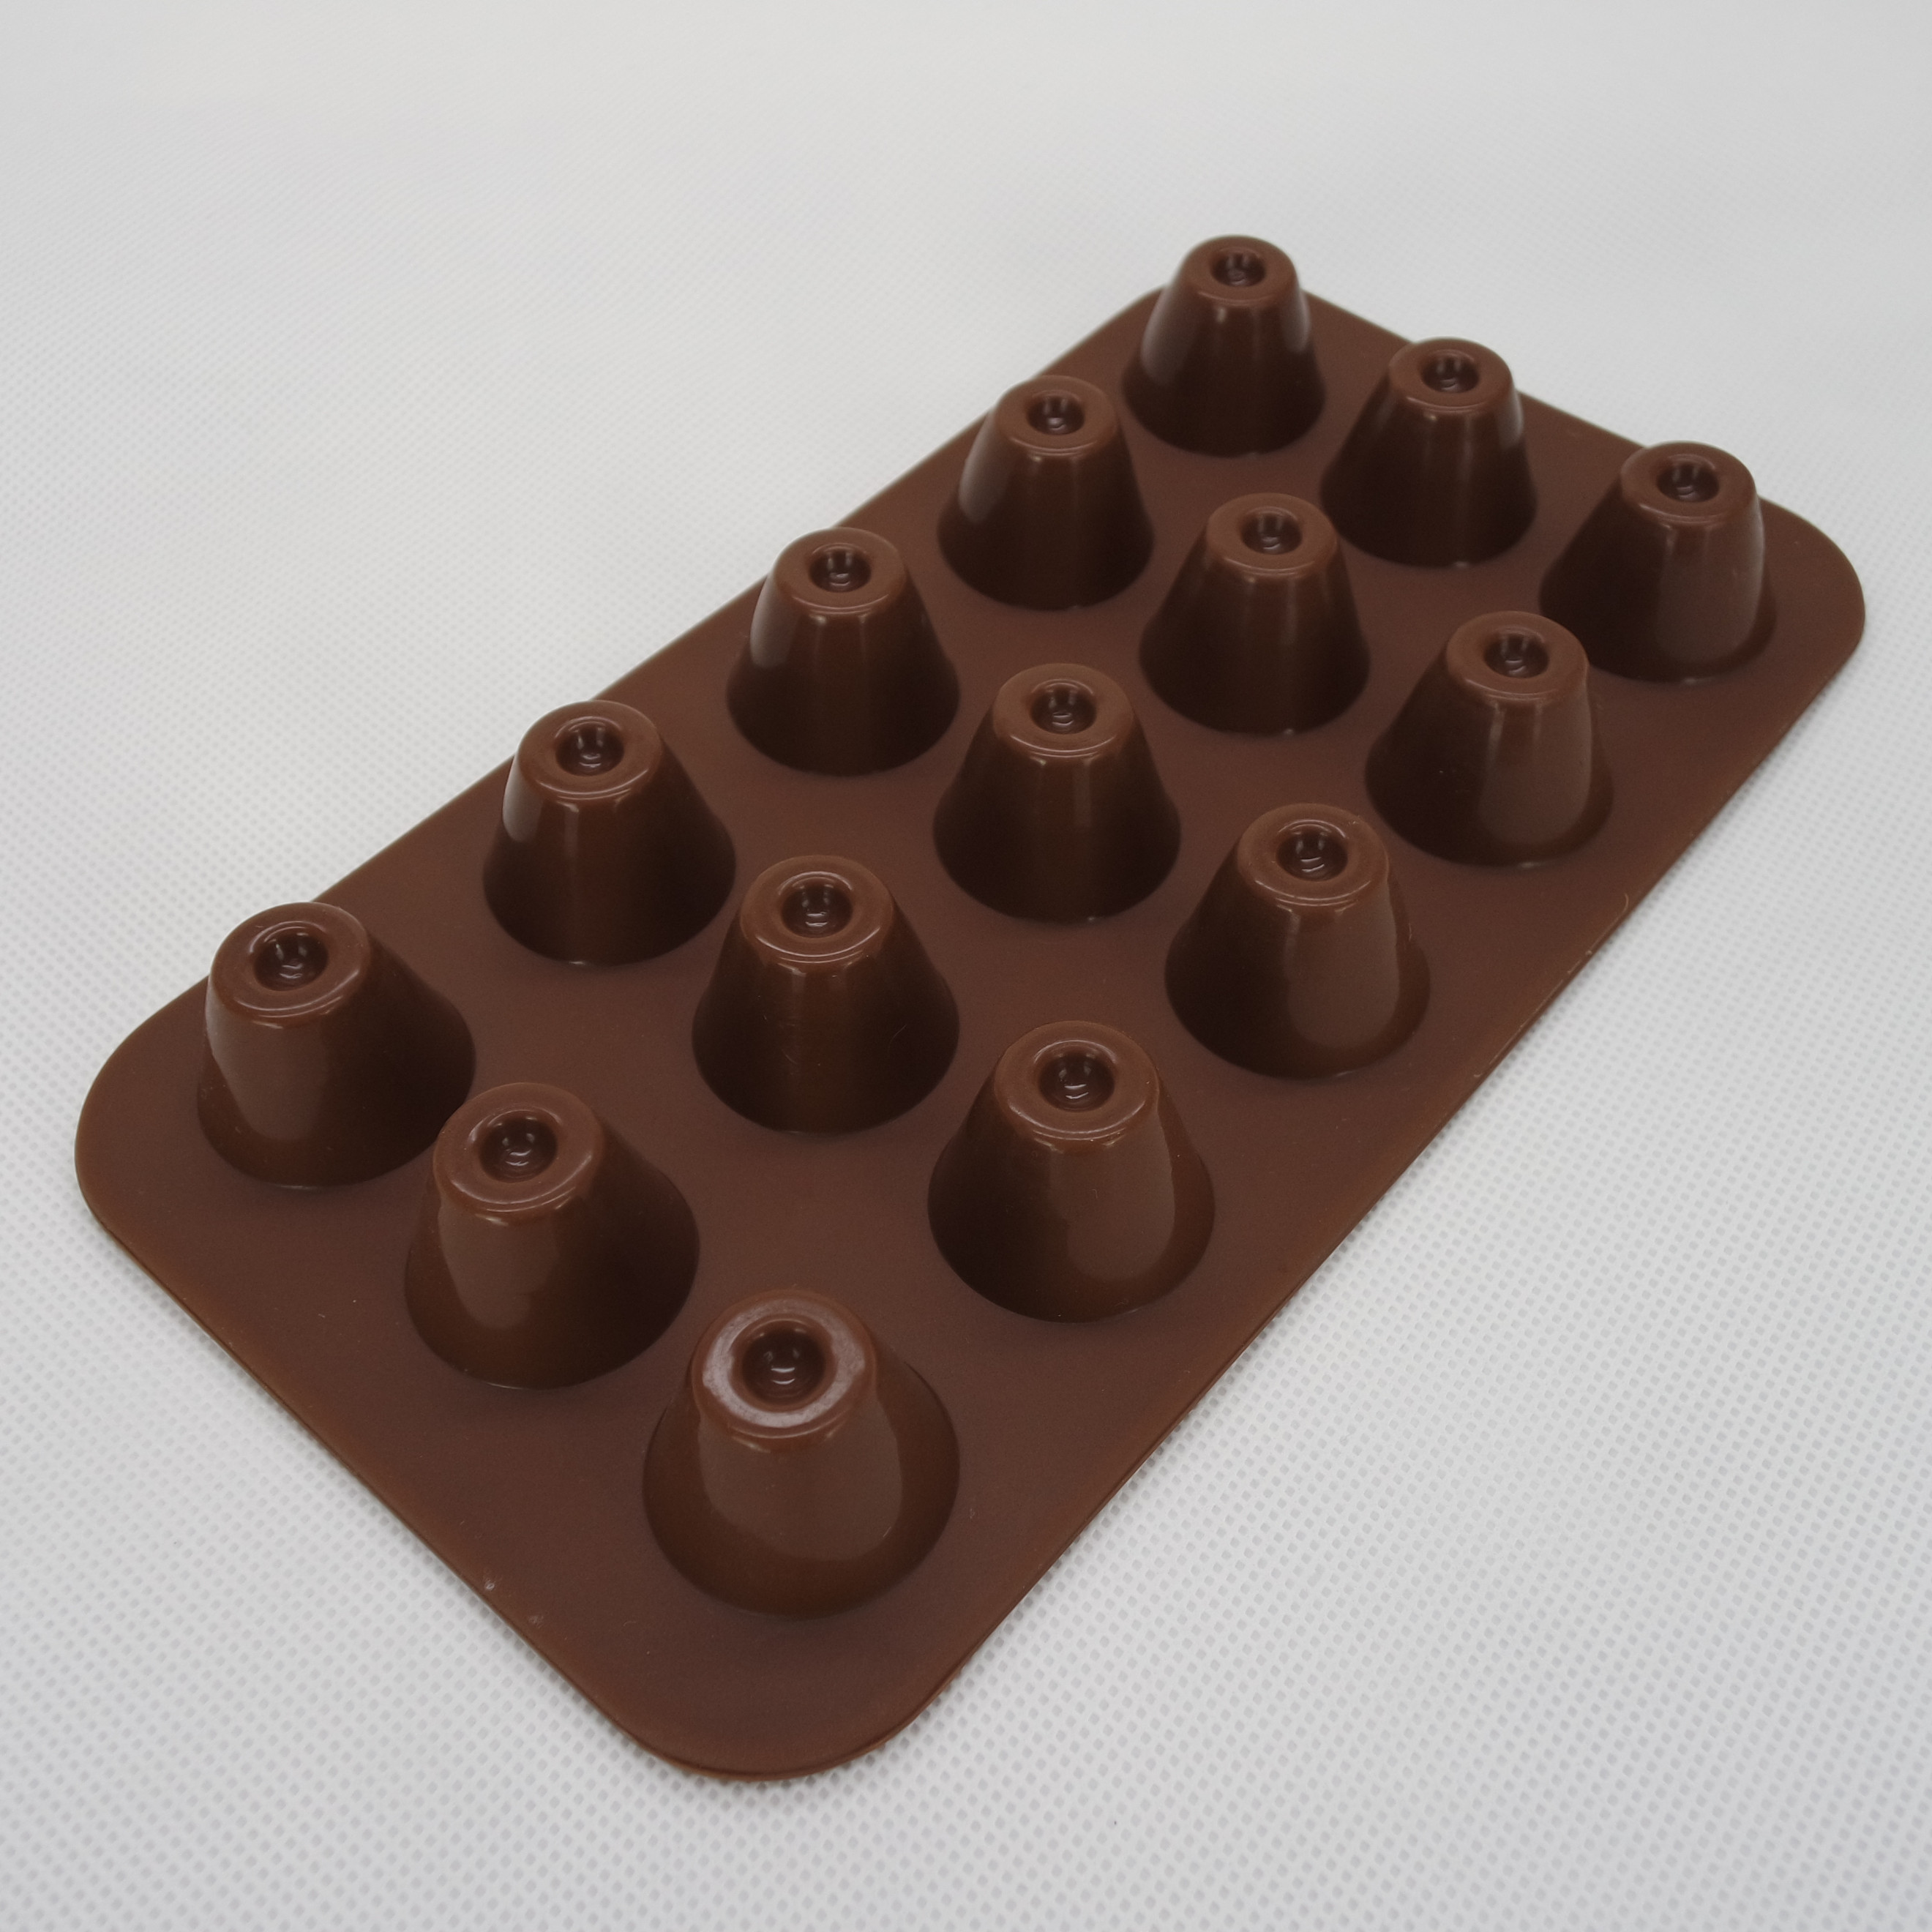 CXCH-025	Silicone chocolate mould